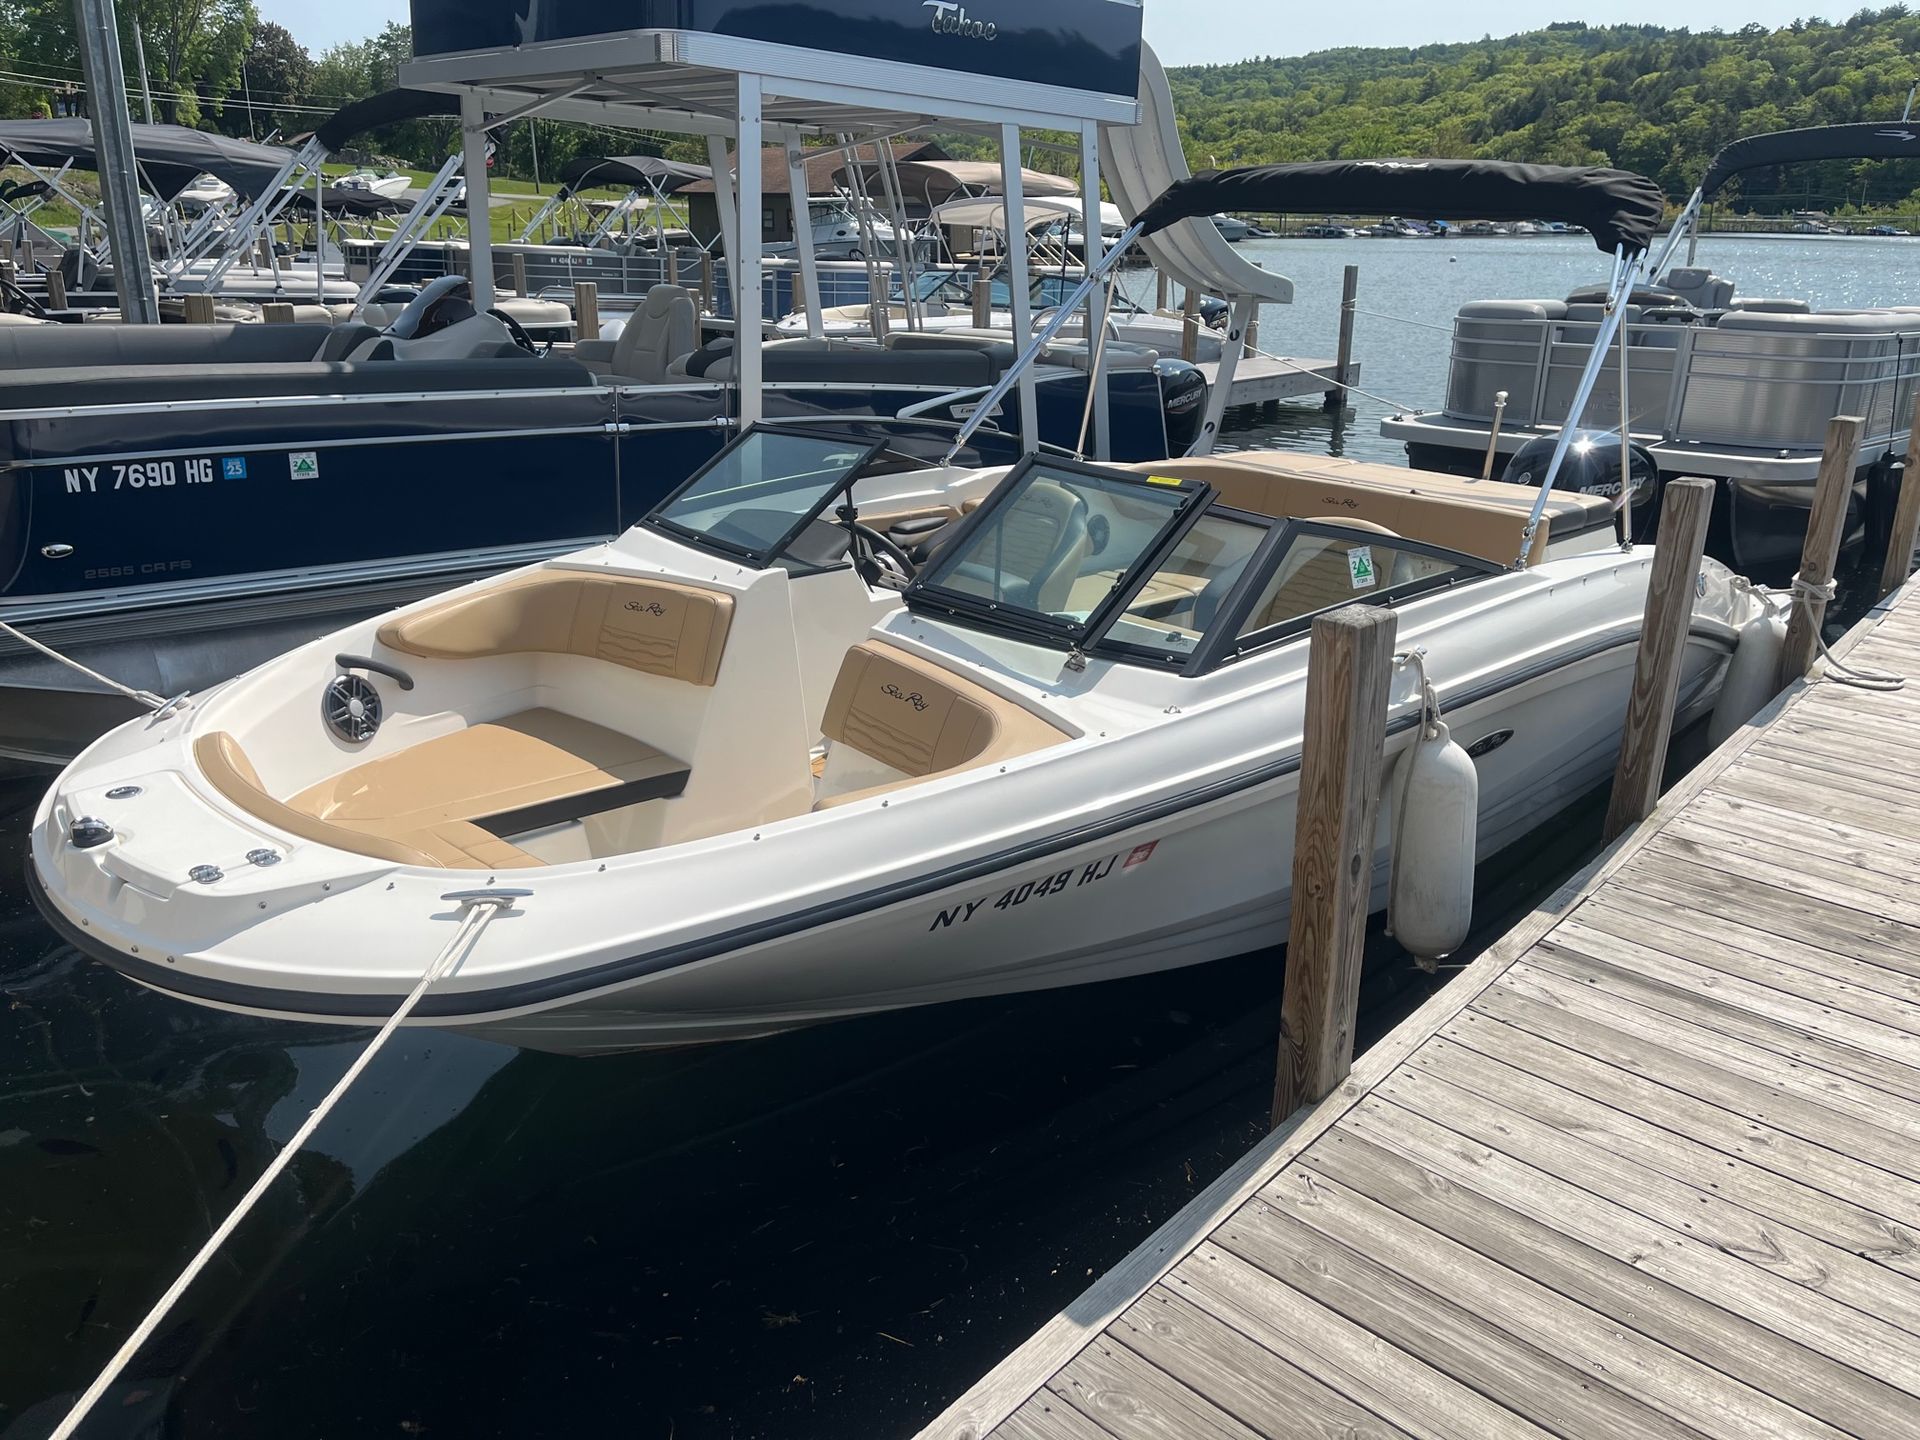 21' Sea Ray 210 with outboard